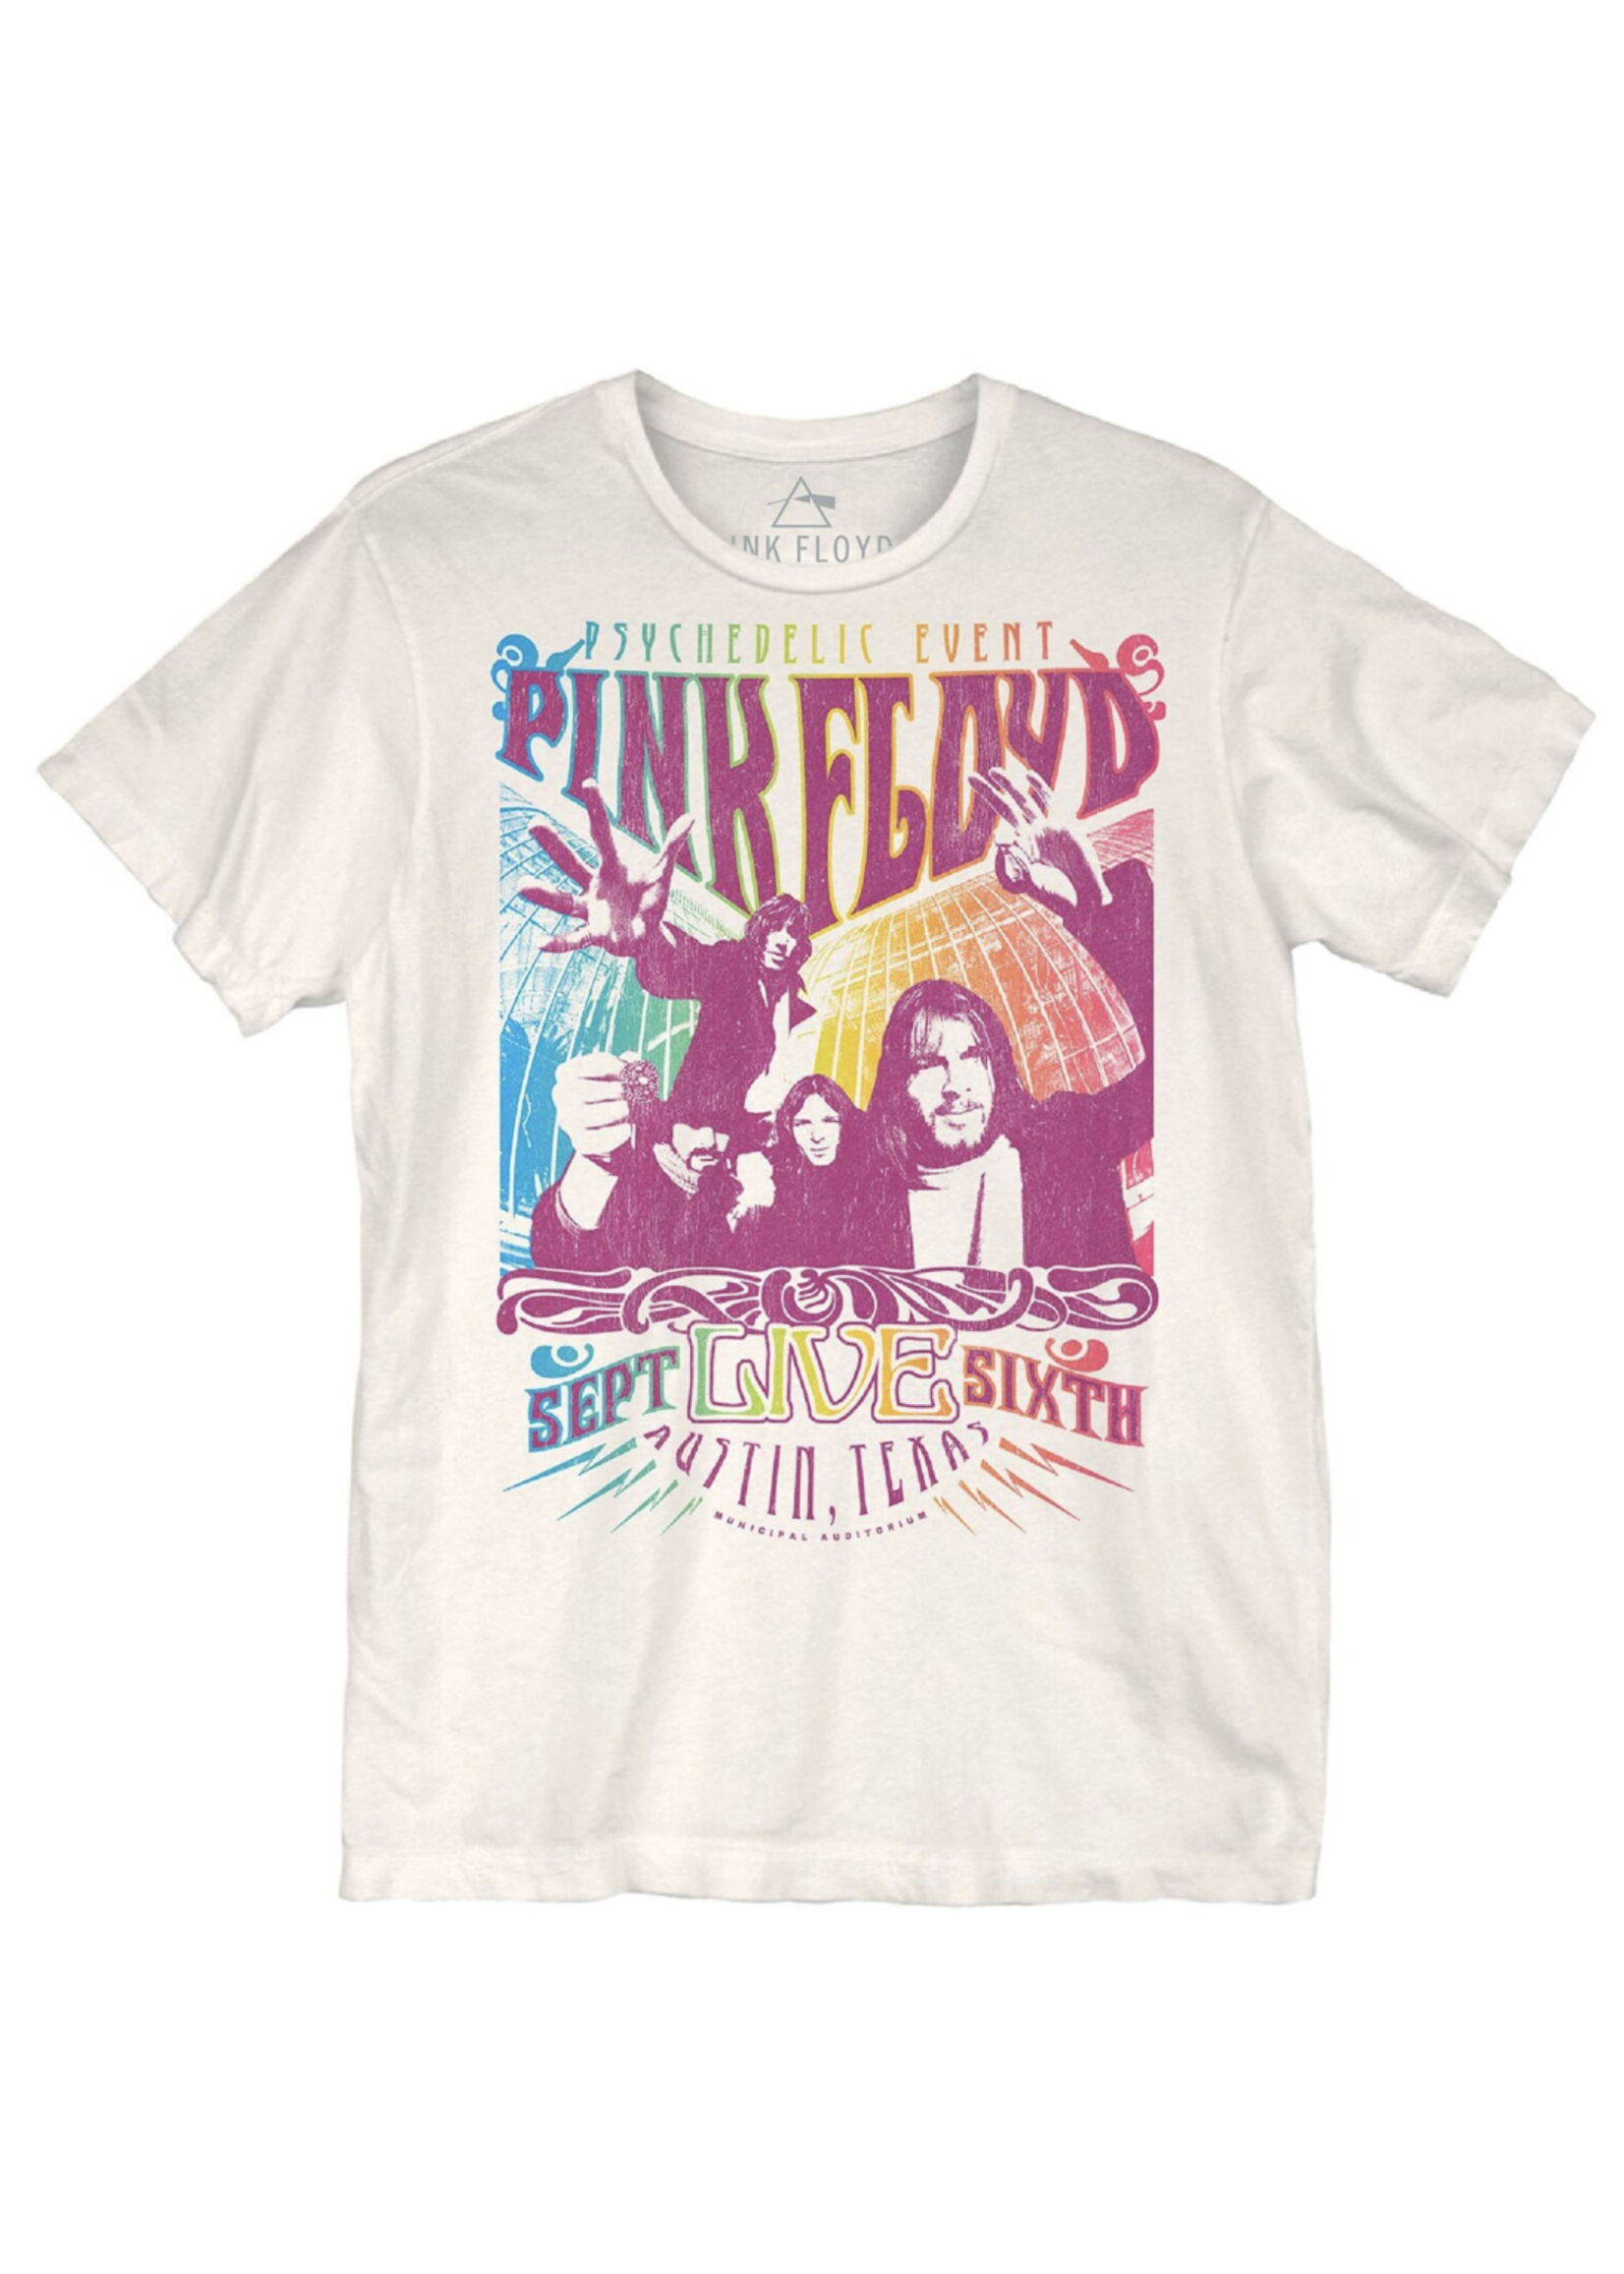 PINK FLOYD PSYCHEDELIC EVENT  T-SHIRT